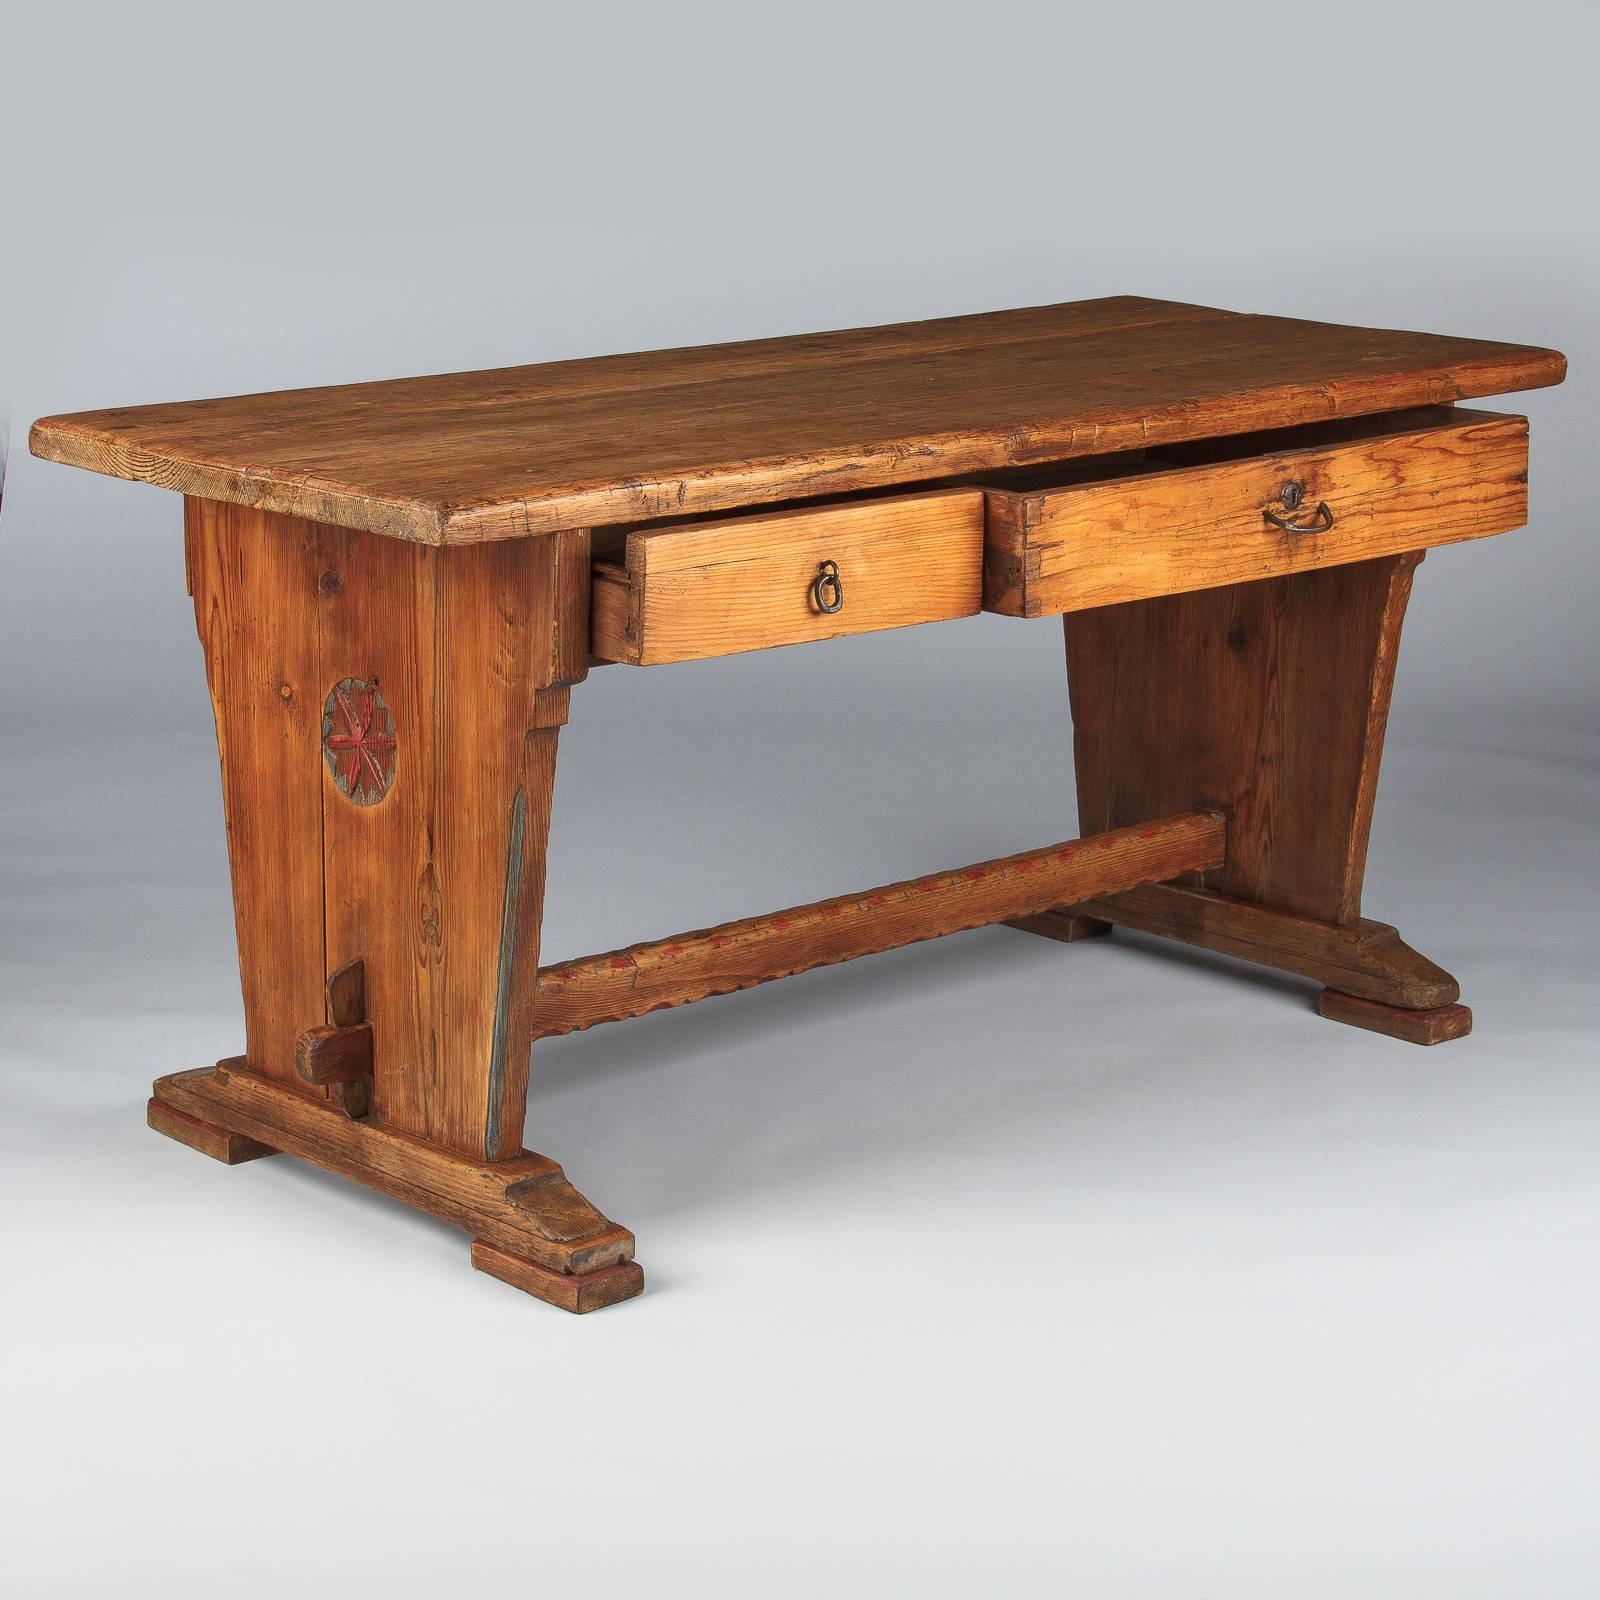 19th Century Country French Rustic Larchwood Desk, Mid-1800s